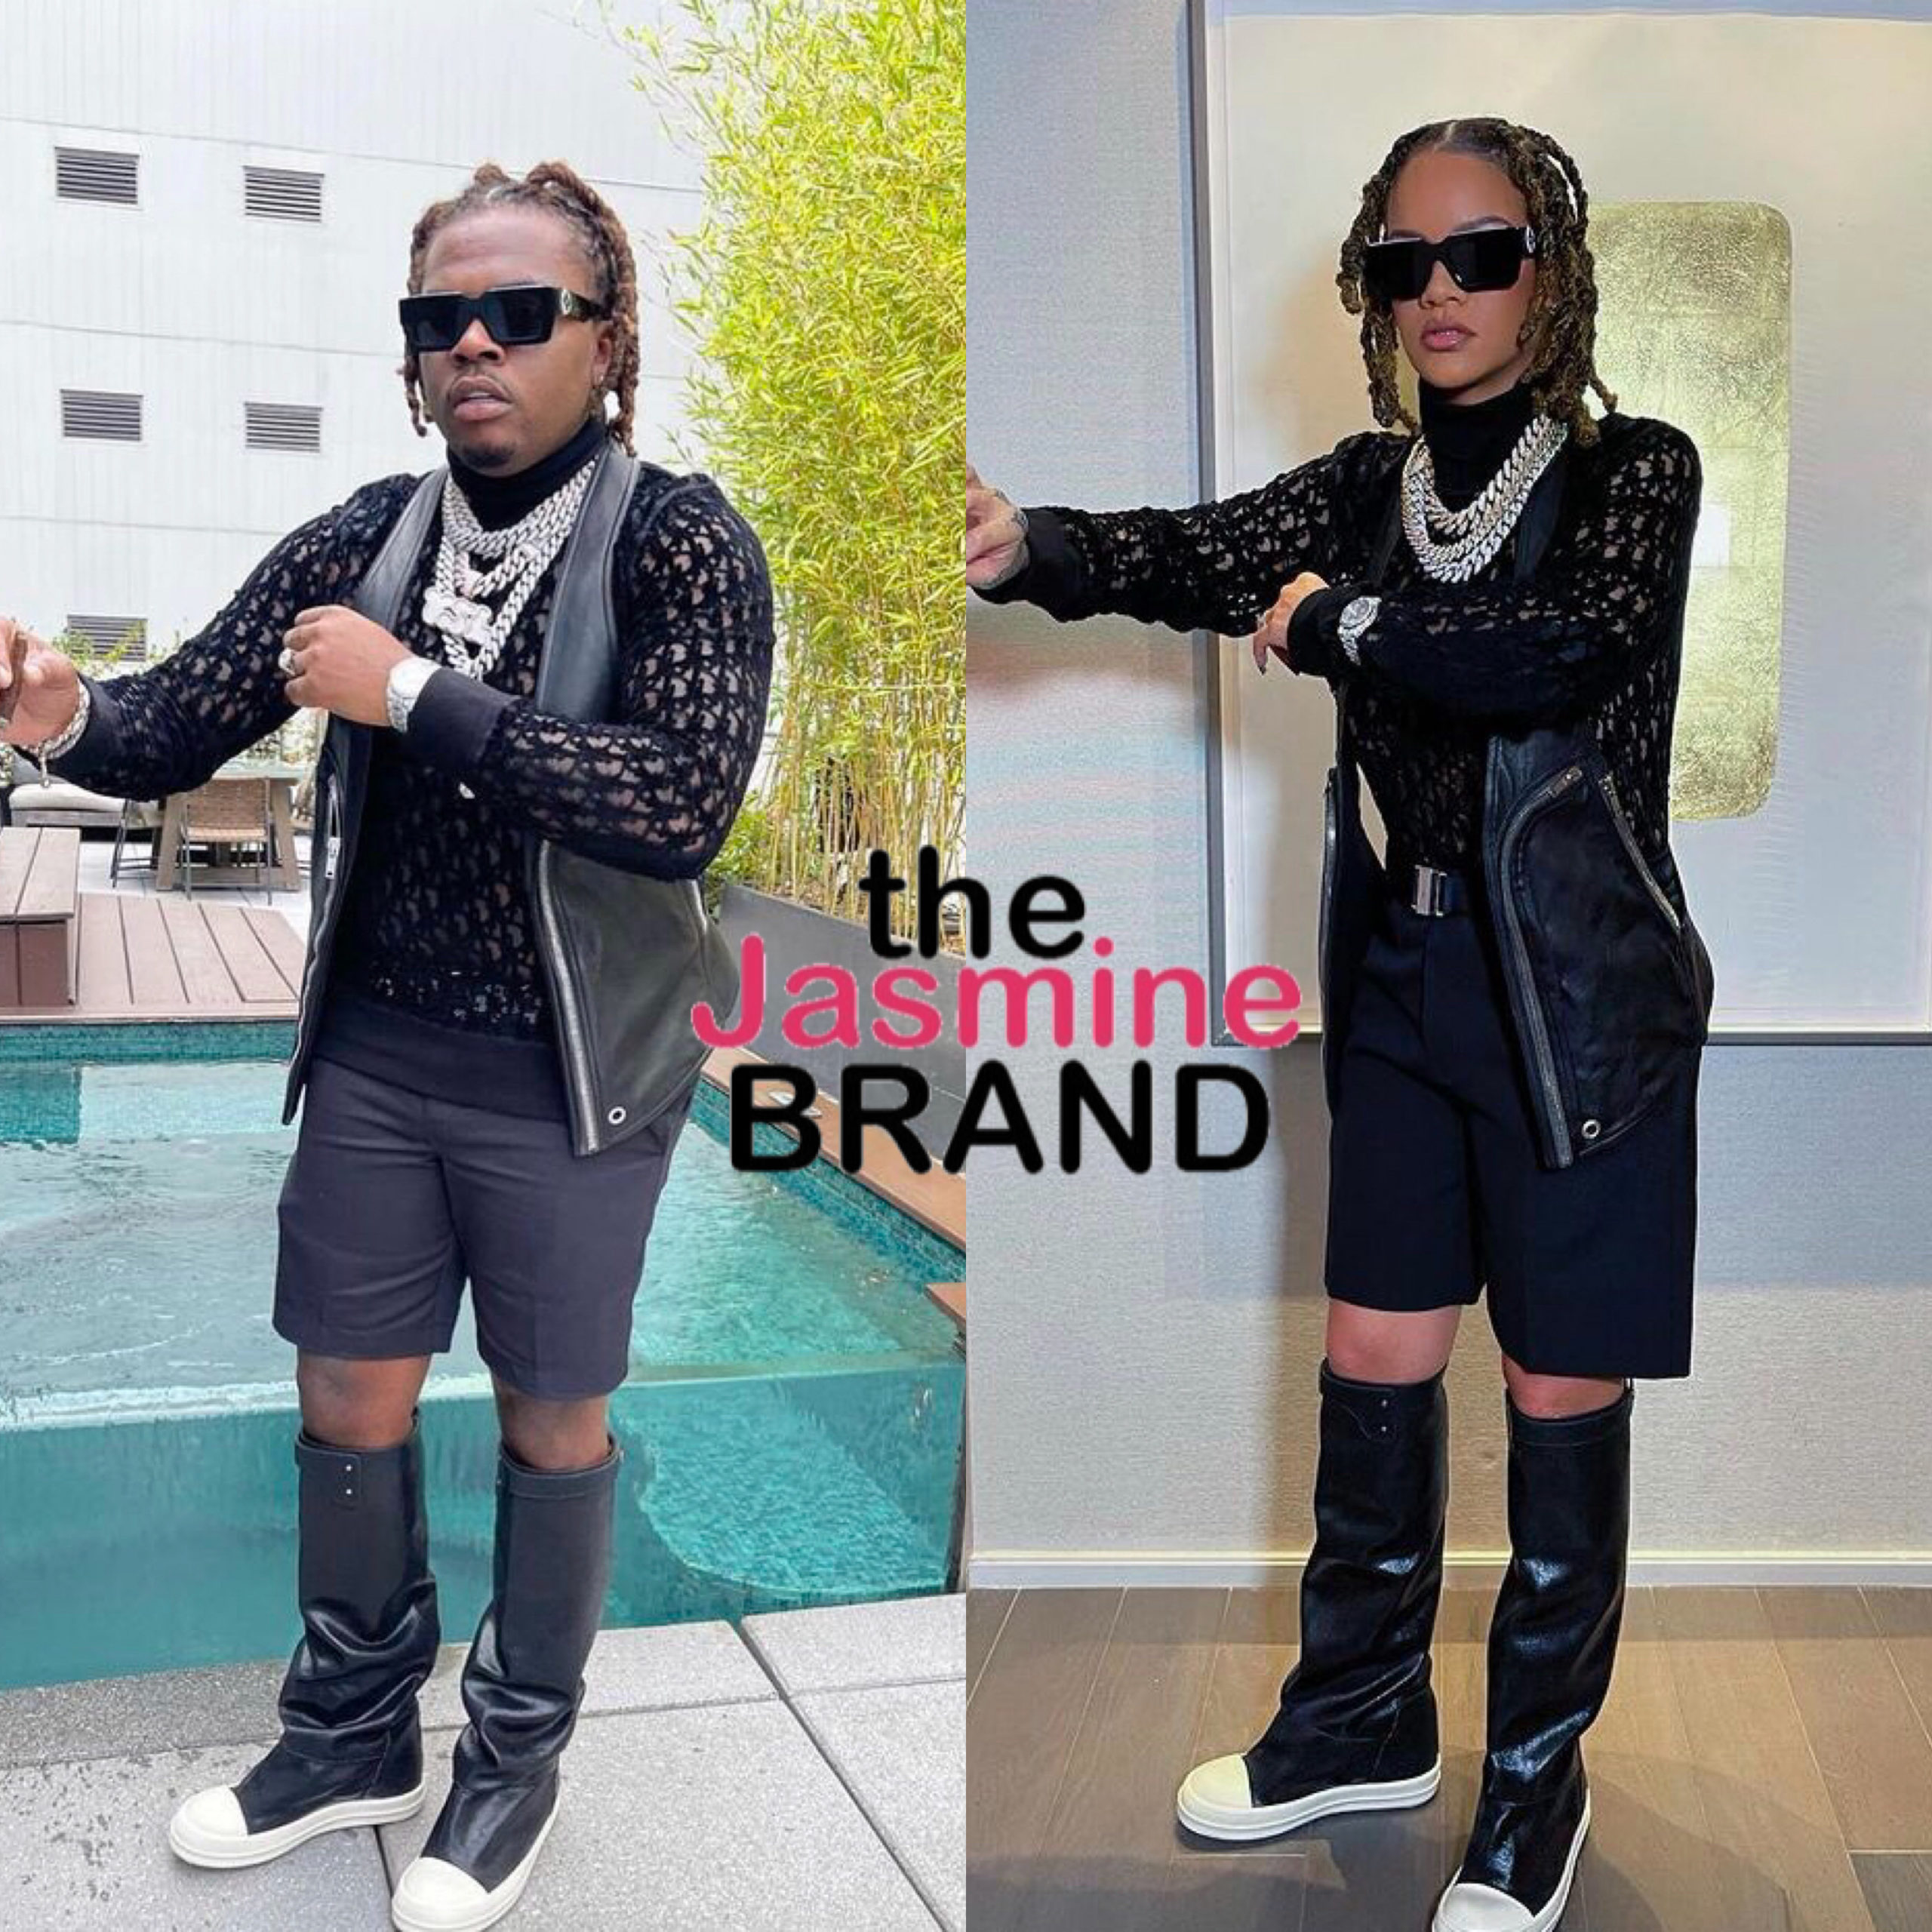 Watch Gunna on His Biggest Fits & Rihanna Stealing His Look